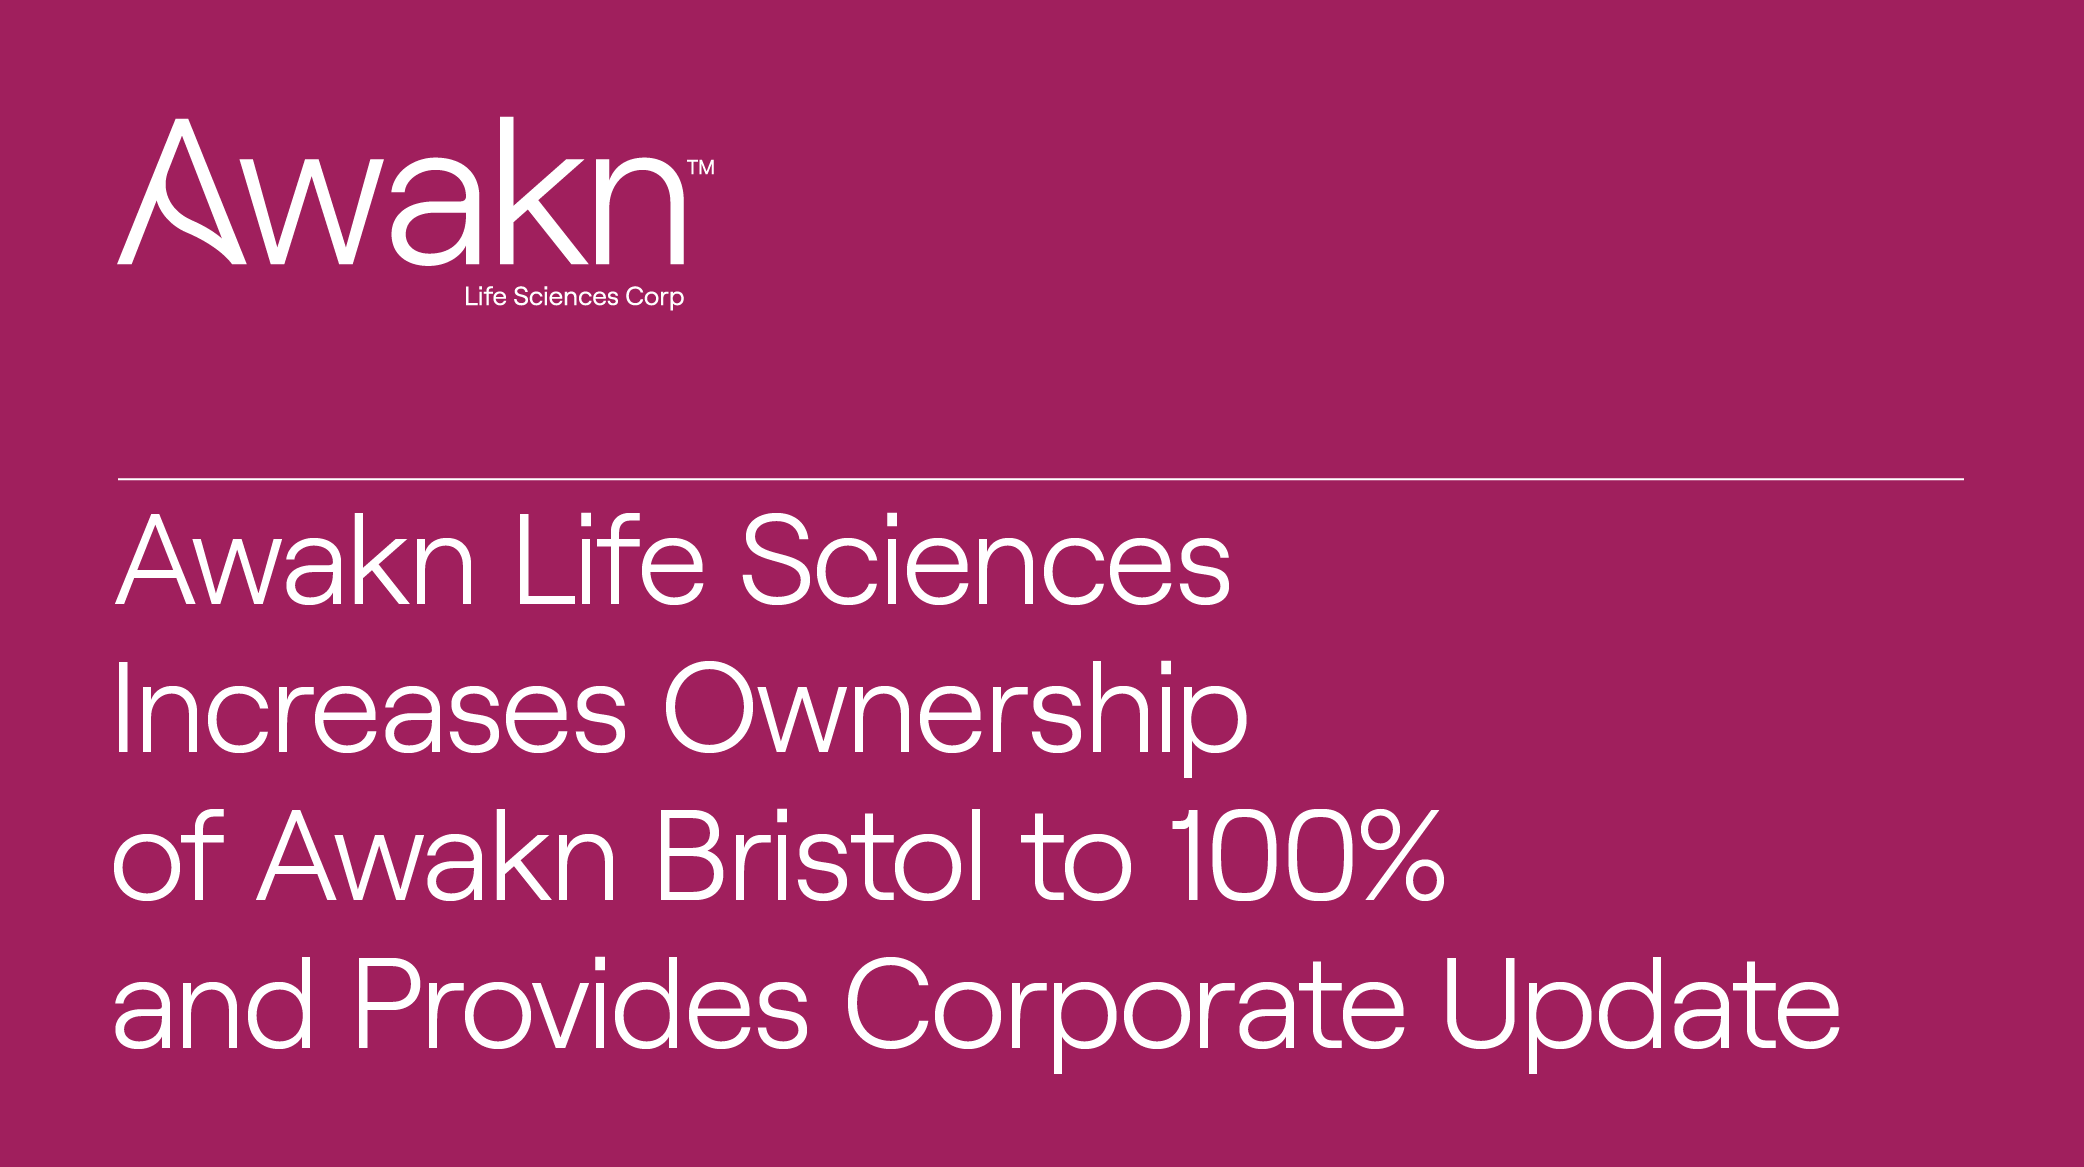 Awakn Increases Ownership of Awakn Bristol to 100% and Provides Corporate Update